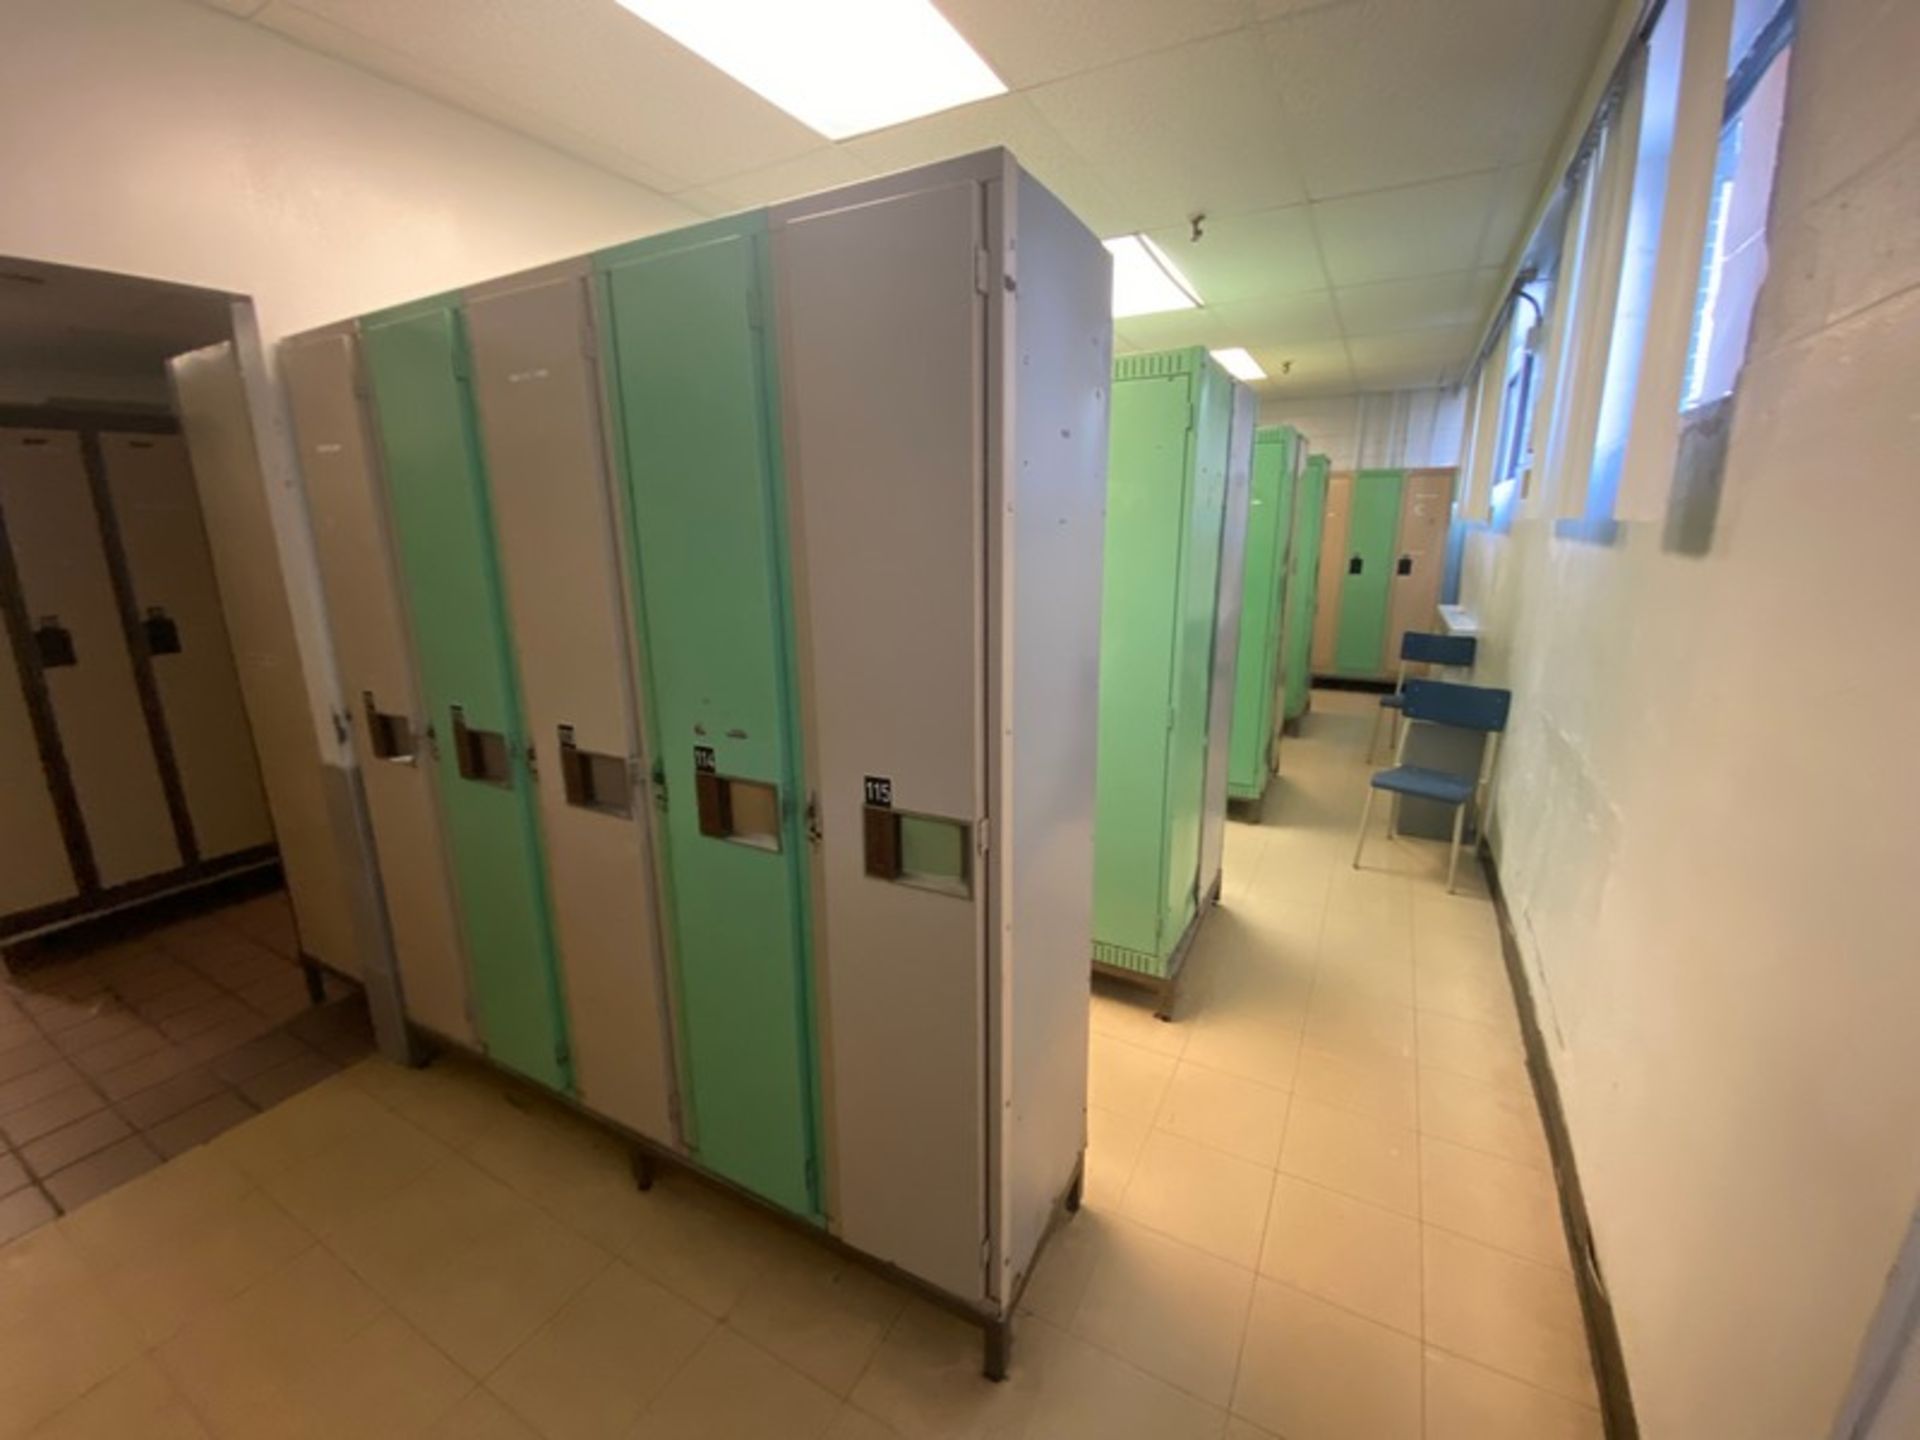 Large Sections of Lockers, Includes All Sections of Lockers in Back Area of Locker Room (LOCATED